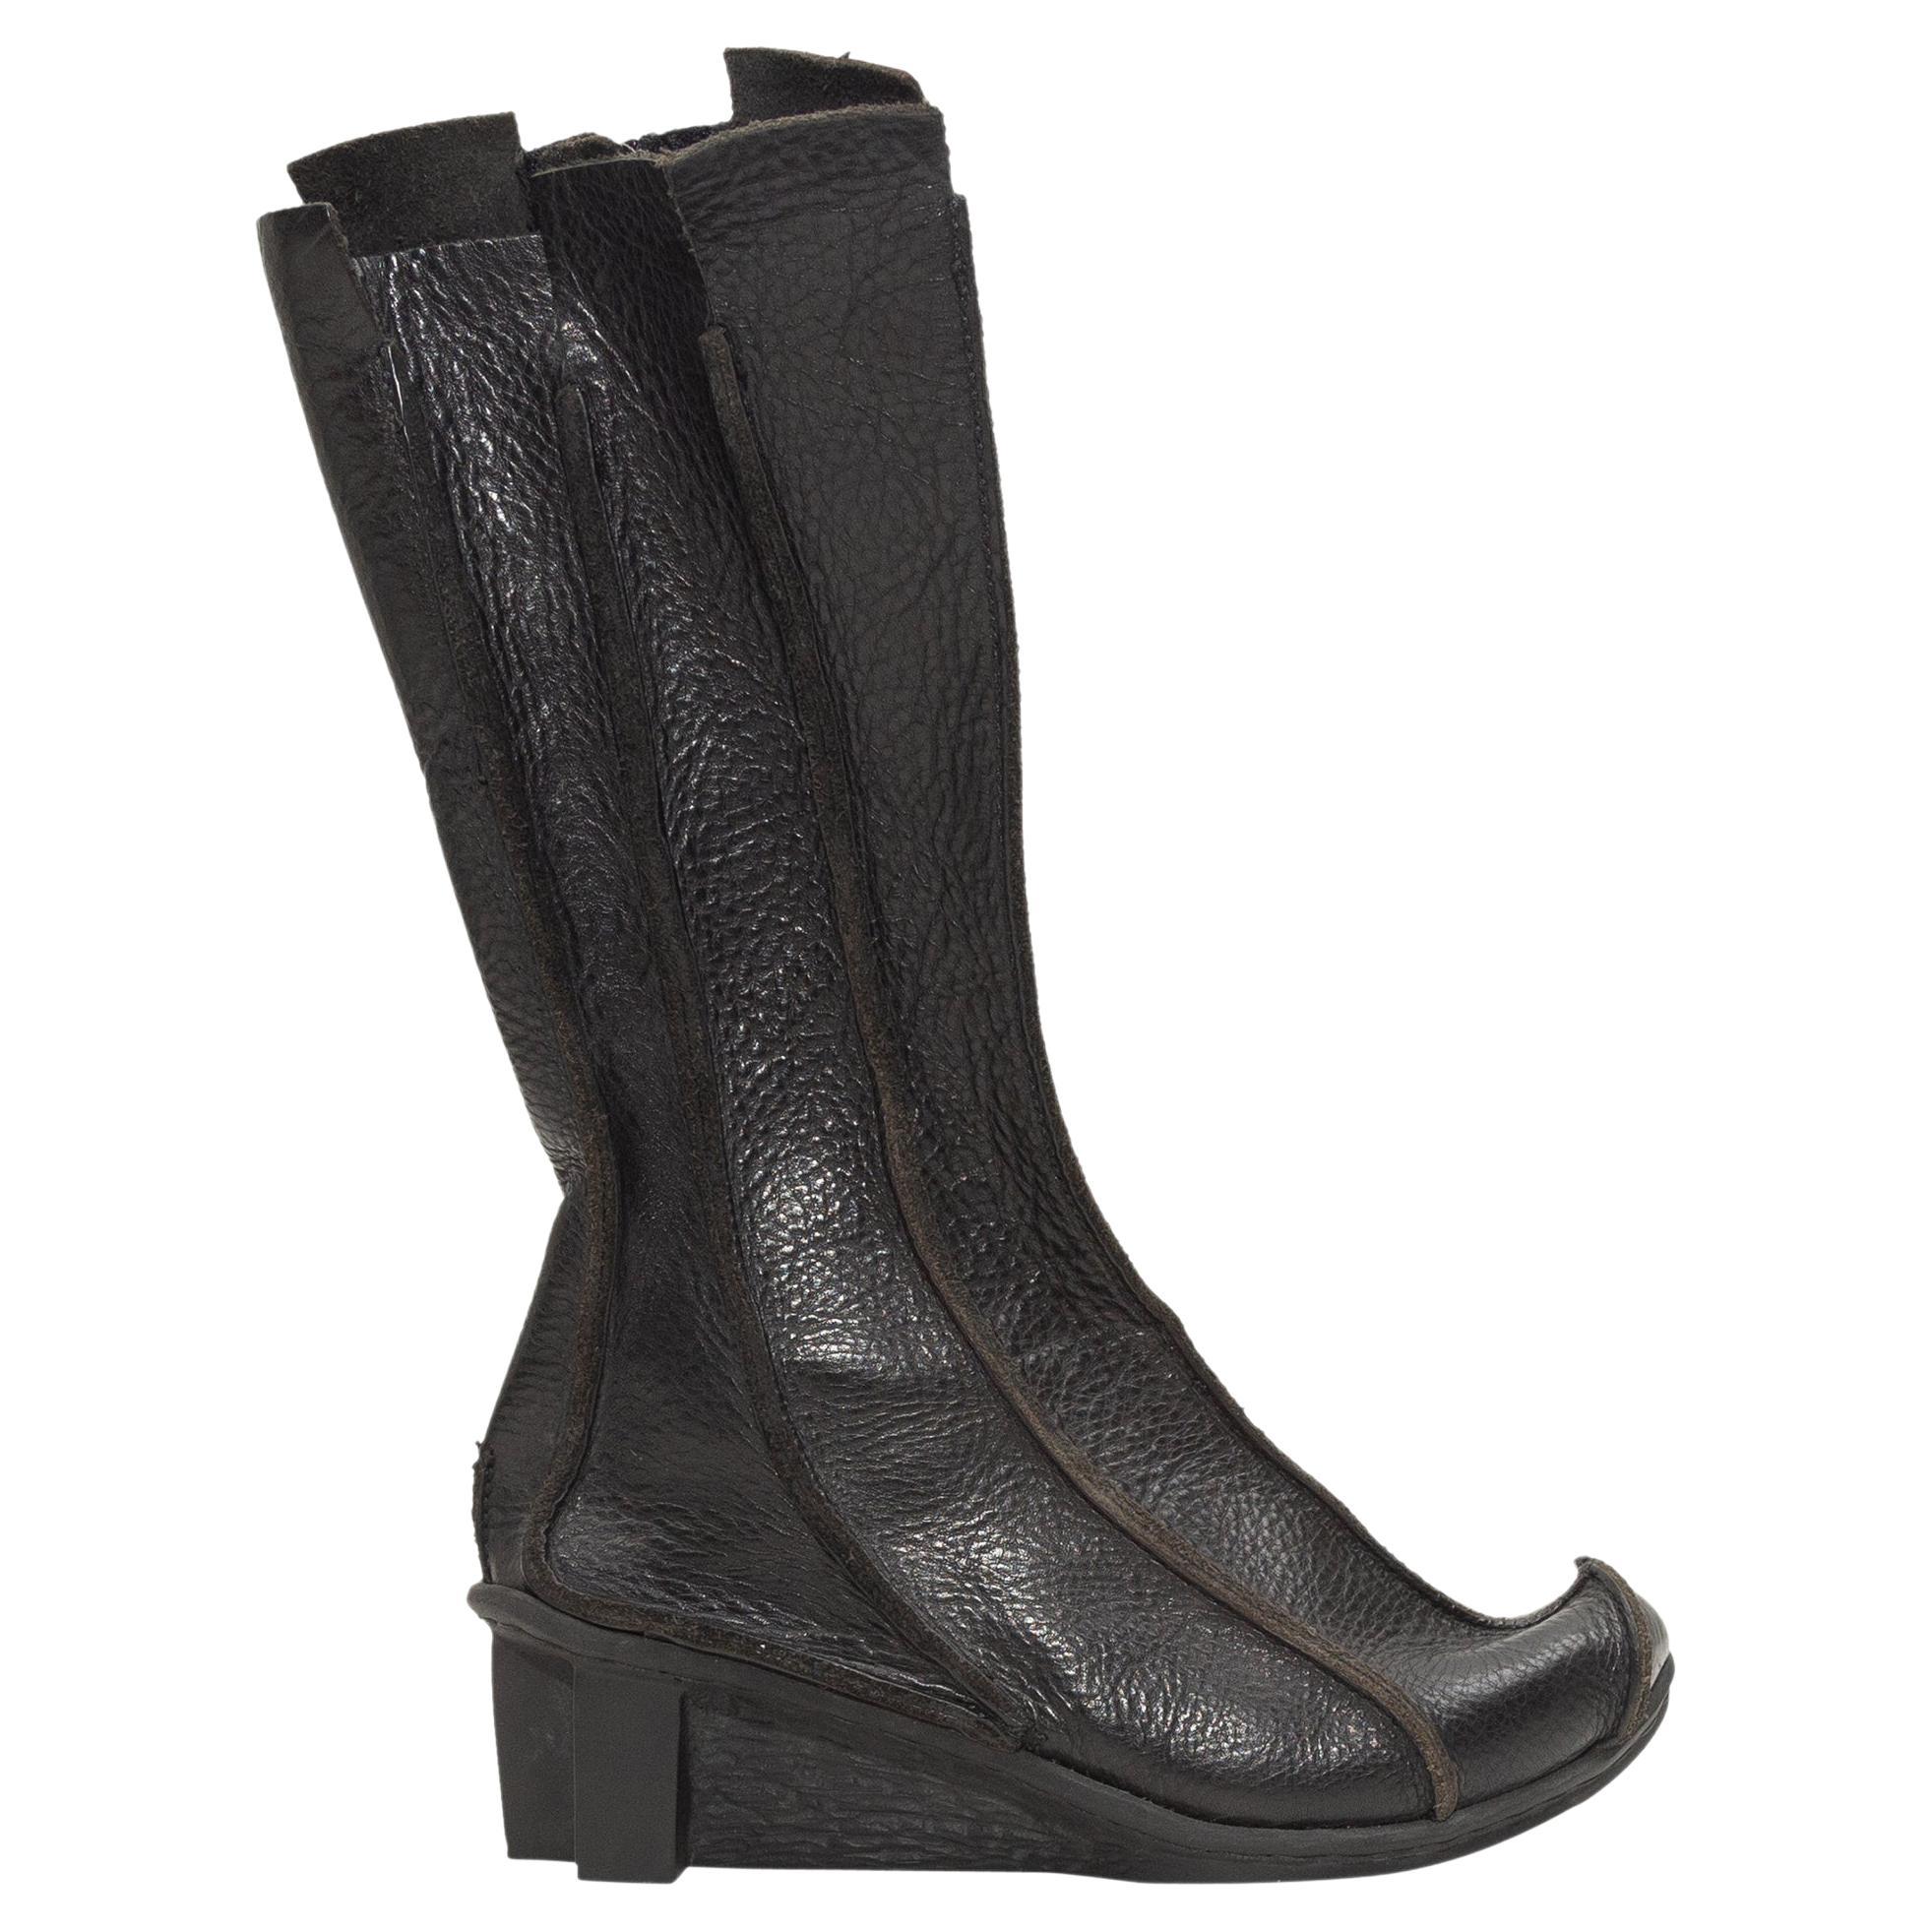 Trippen Black Leather Panel Wedge Boots